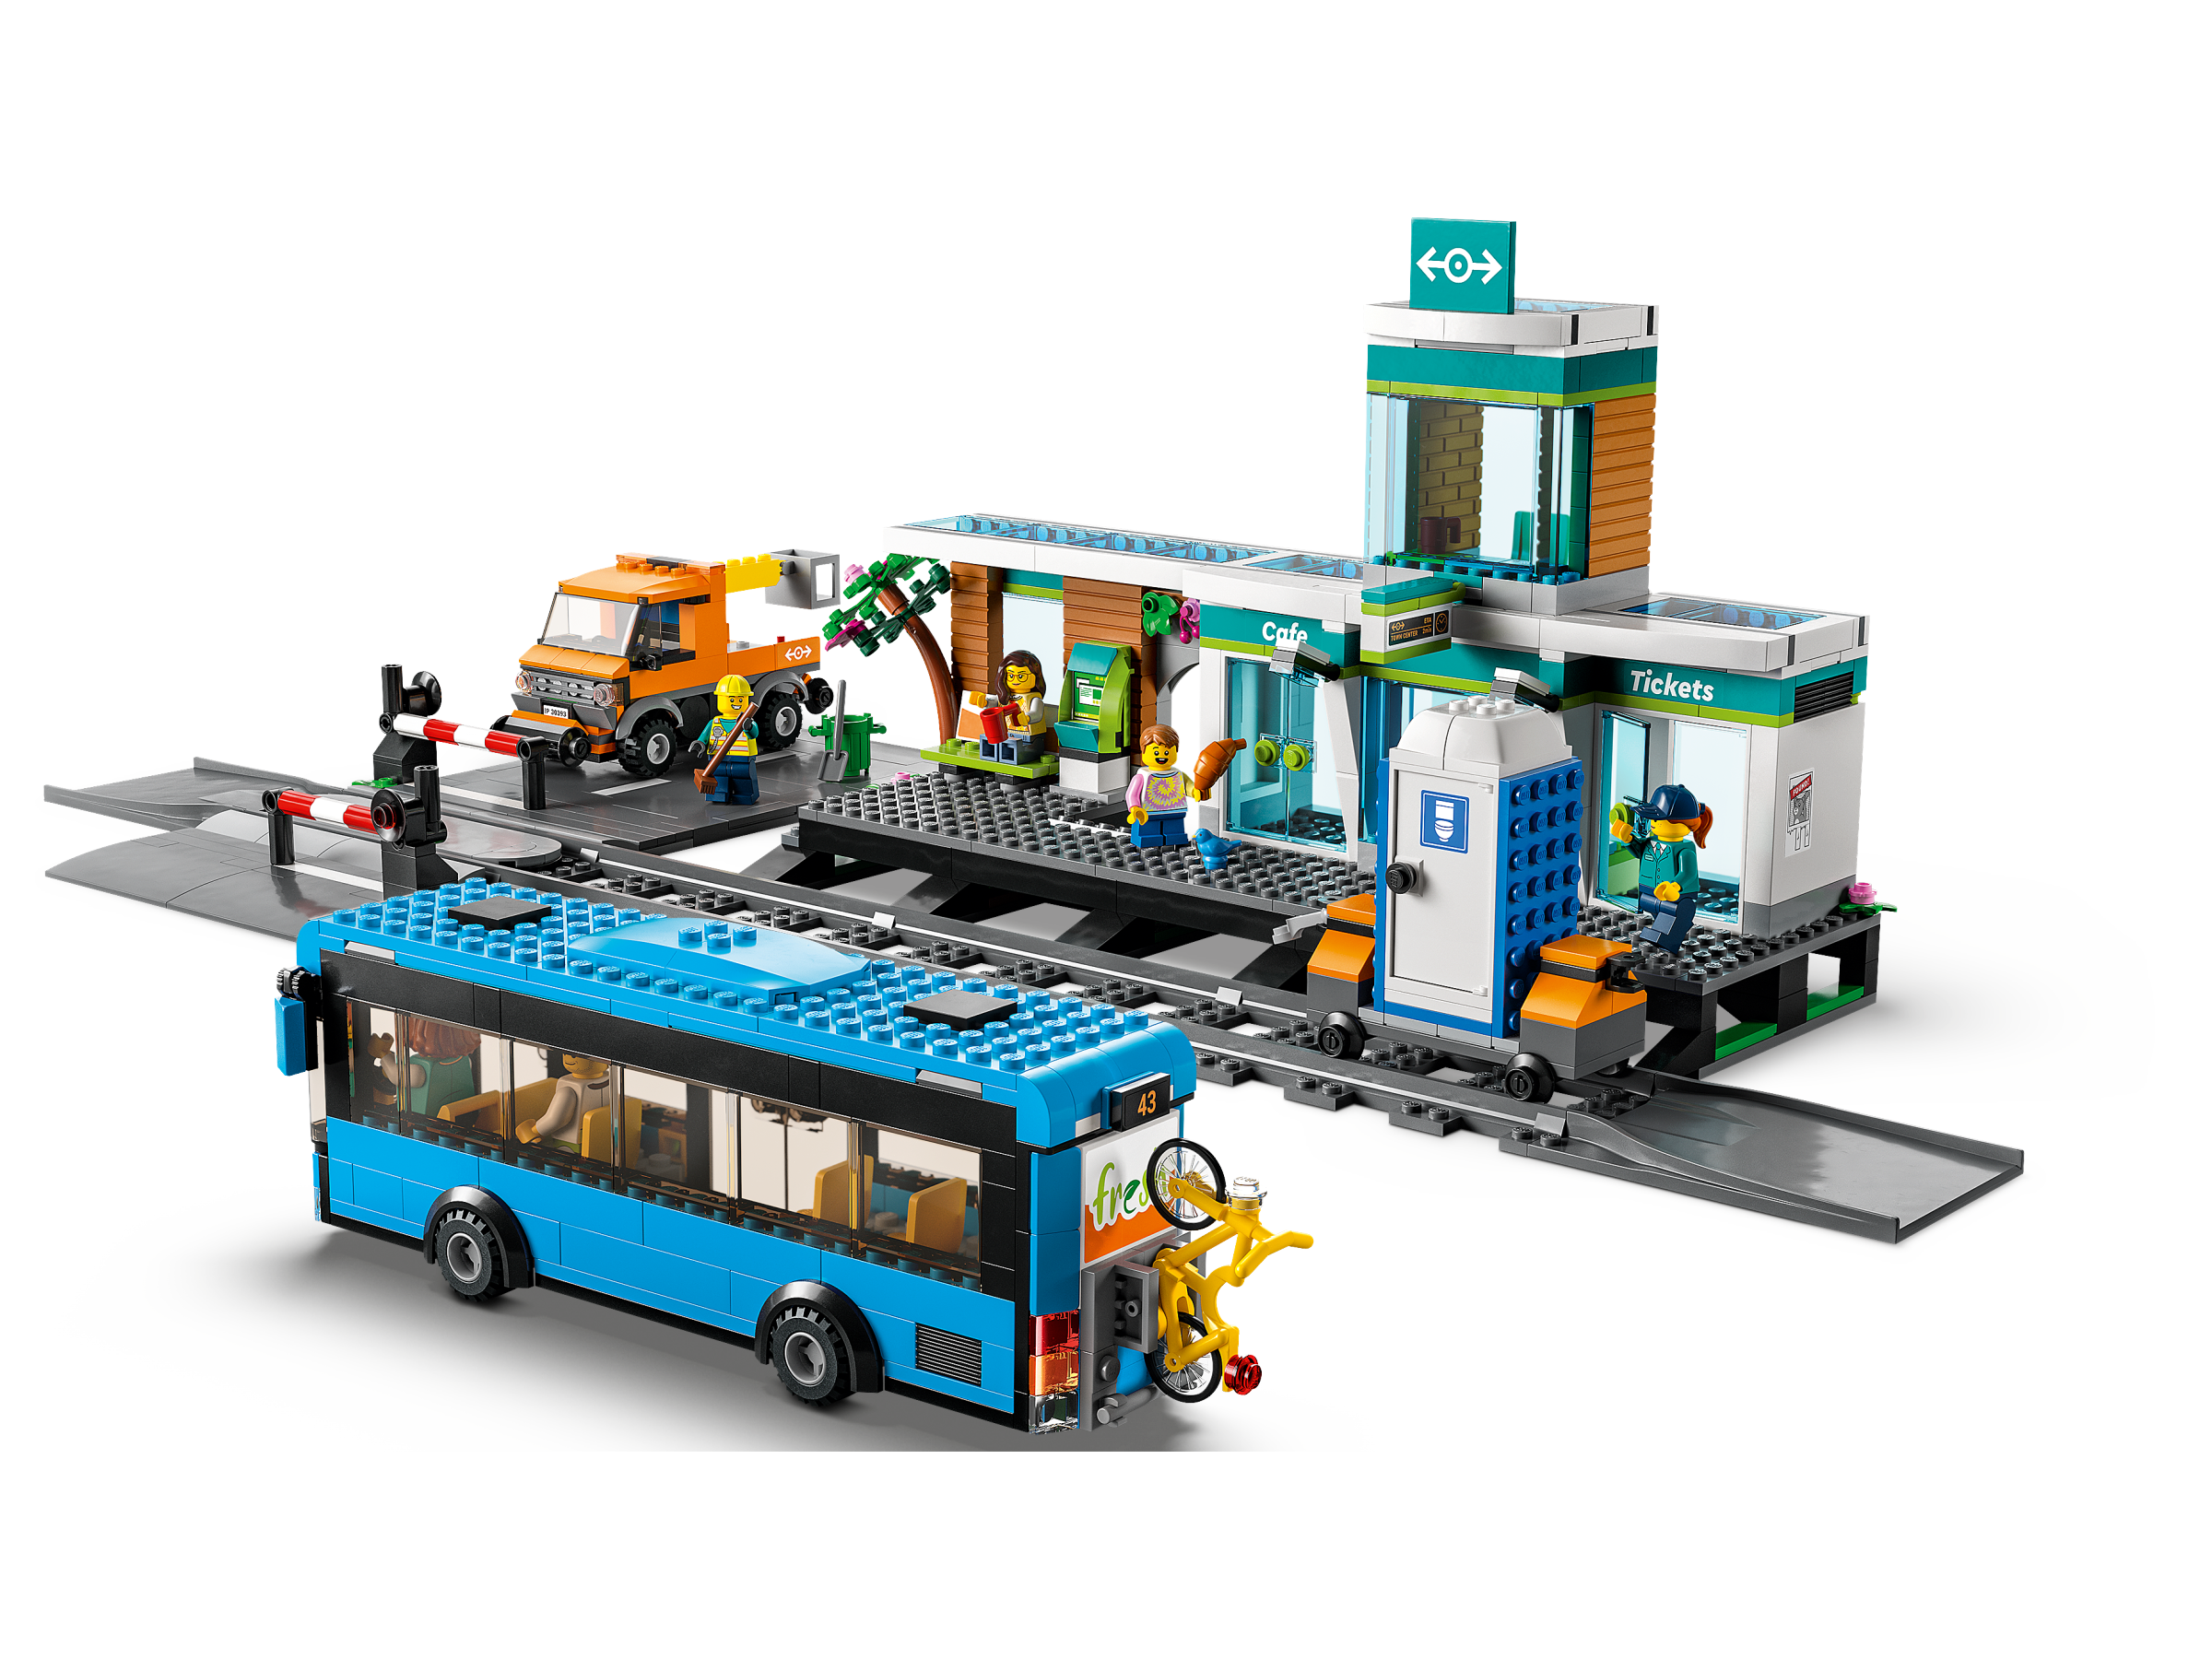 Train Station 60335 | City | Buy online at the Official LEGO® Shop US